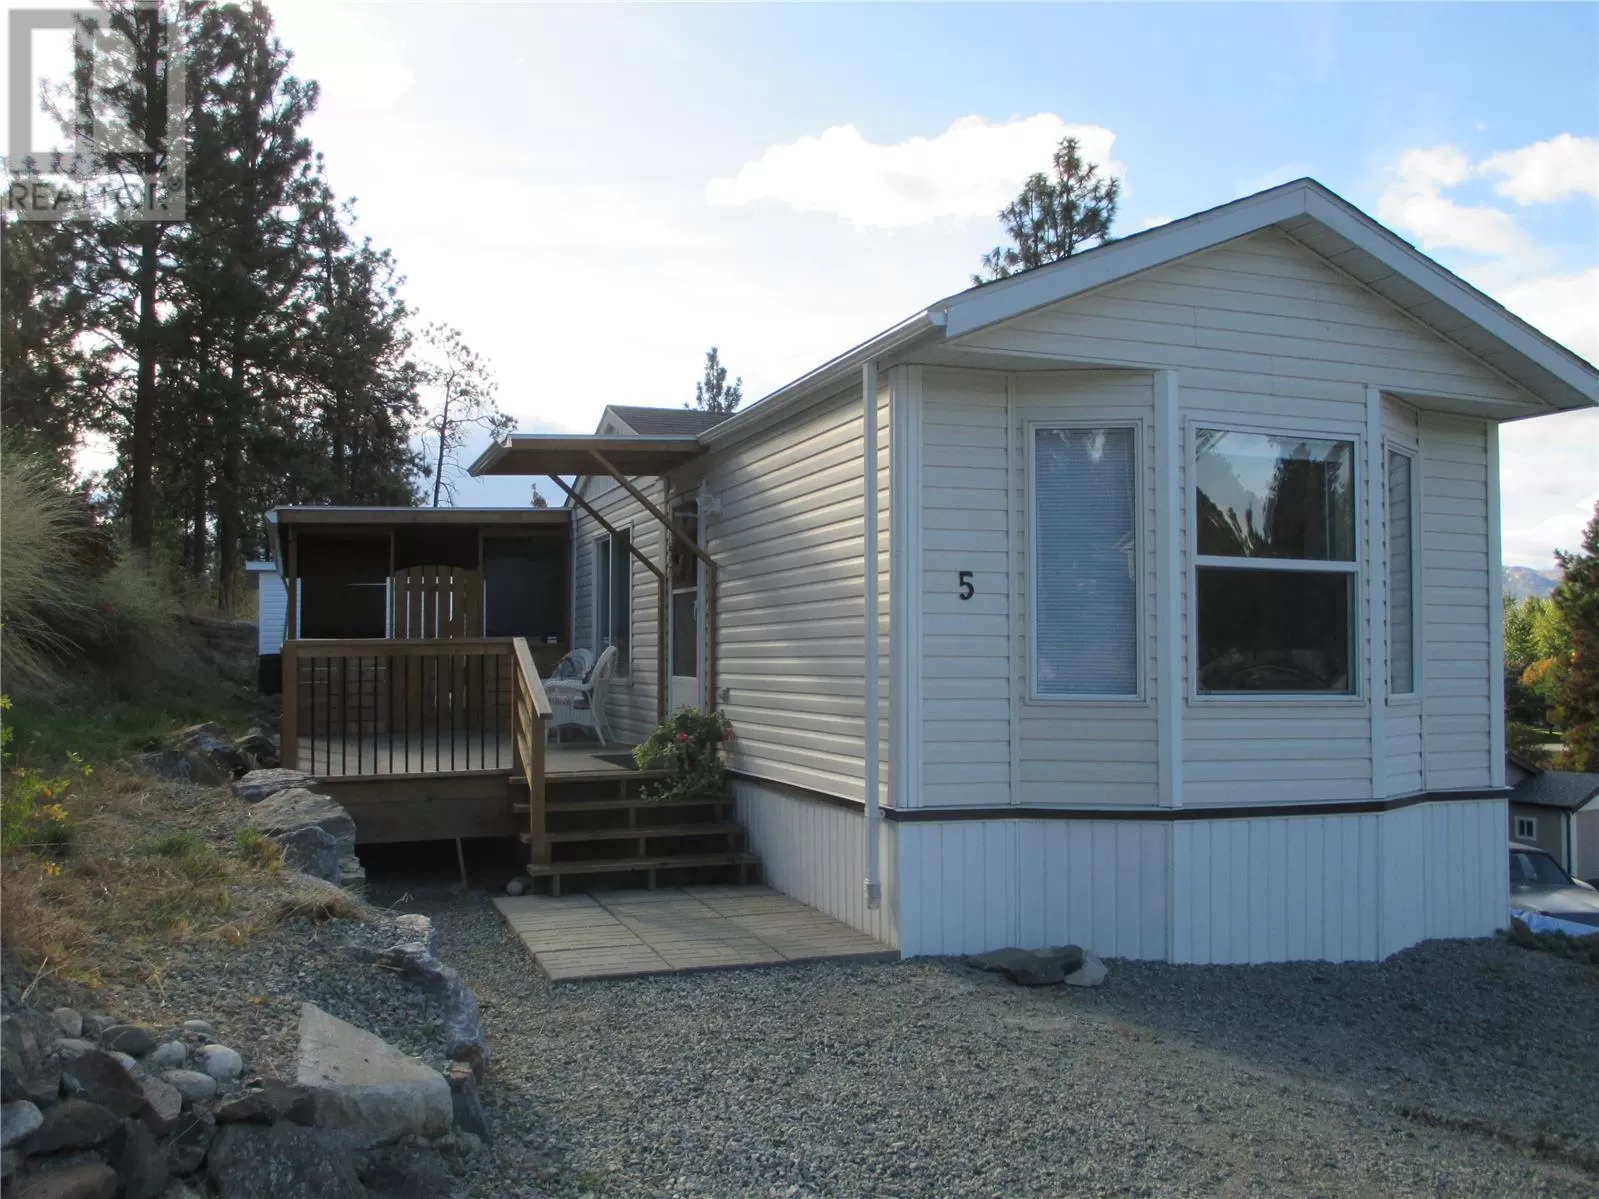 Manufactured Home for rent: 1860 Boucherie Road Unit# 5, West Kelowna, British Columbia V4T 1Z9